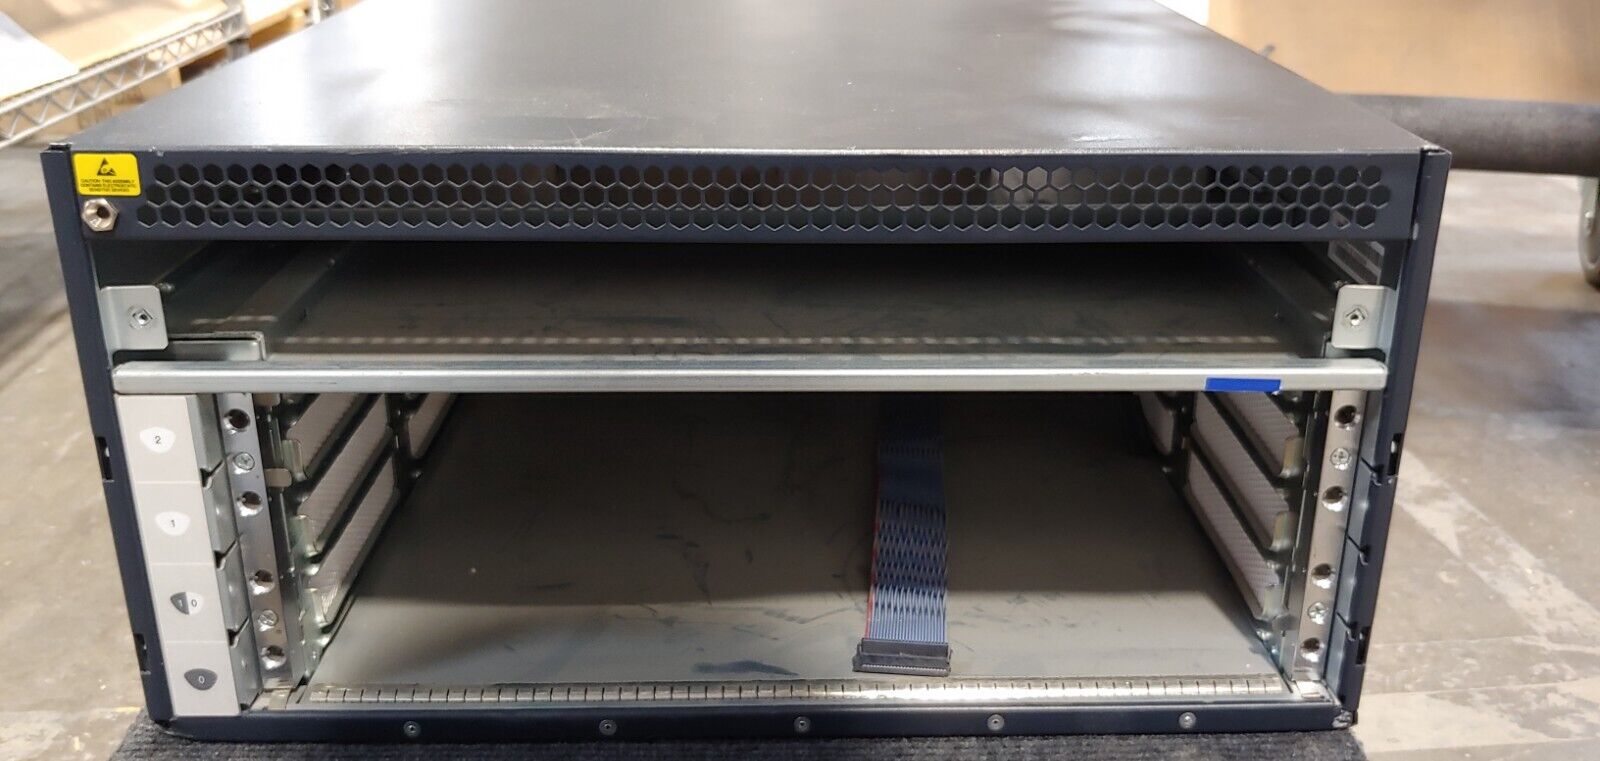 Juniper Networks CHAS-BP3-MX240-S Router Chassis, 2x PWR-MX480-2520-AC-S *BLEM*